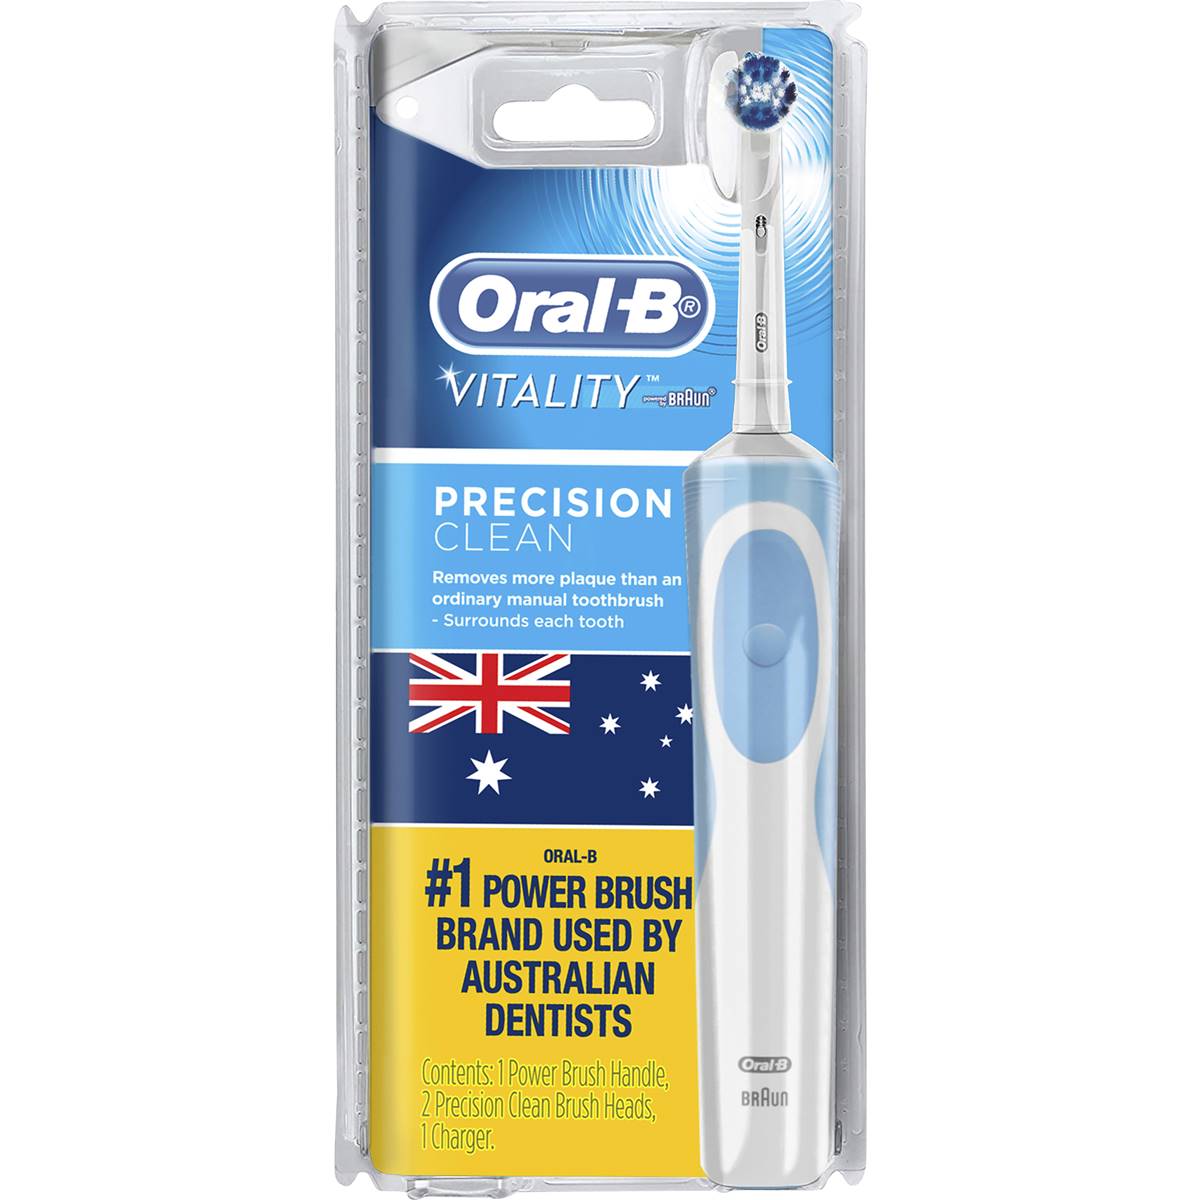 Oral-b Vitality Plus Powered Toothbrush Precision Clean